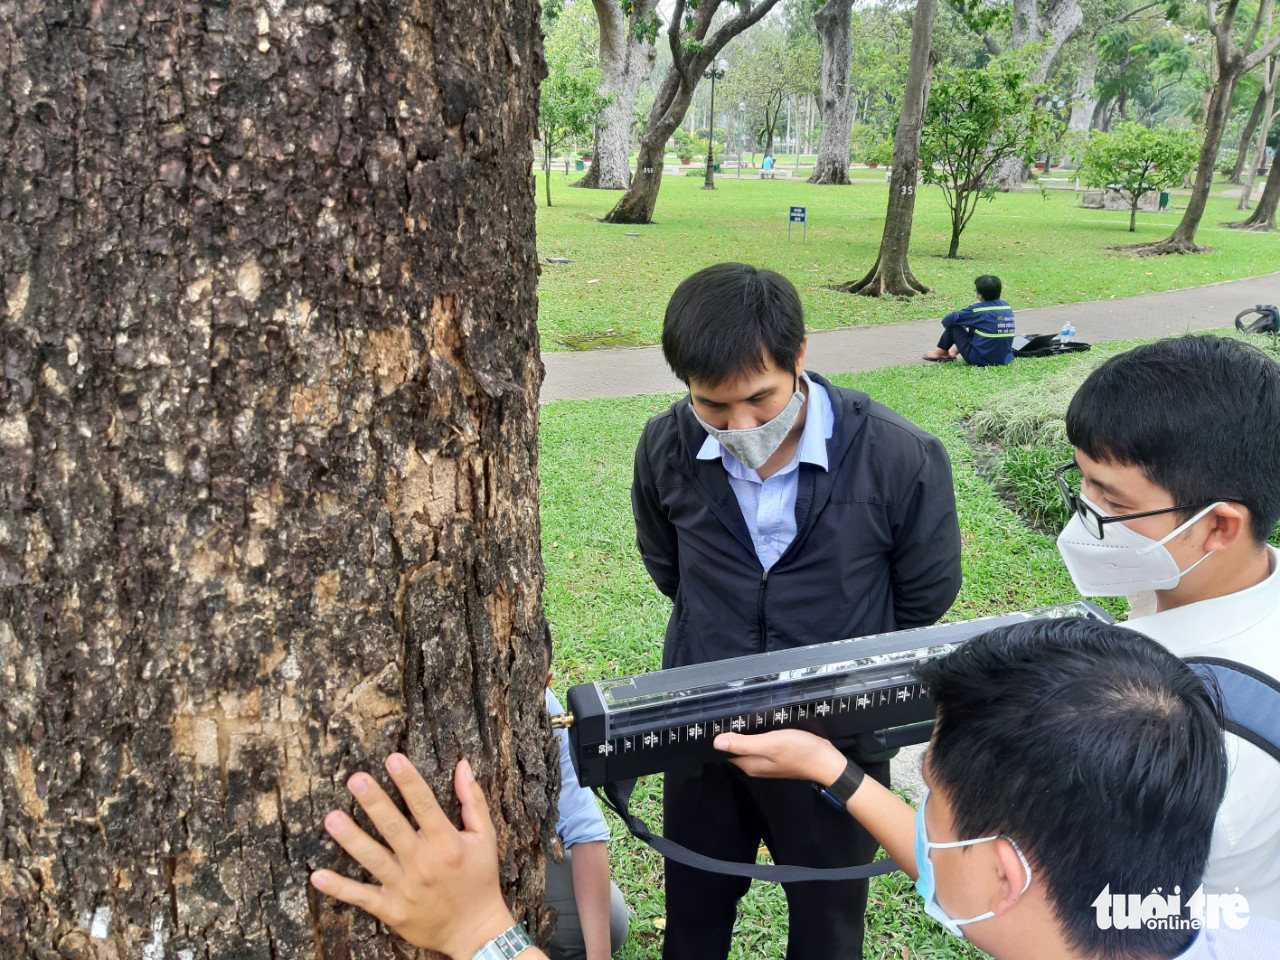 This supplied photo shows employees of the Ho Chi Minh City Greenery Parks Co. Ltd. using a specialized instrument to detect decayed trees at a park in Ho Chi Minh City.